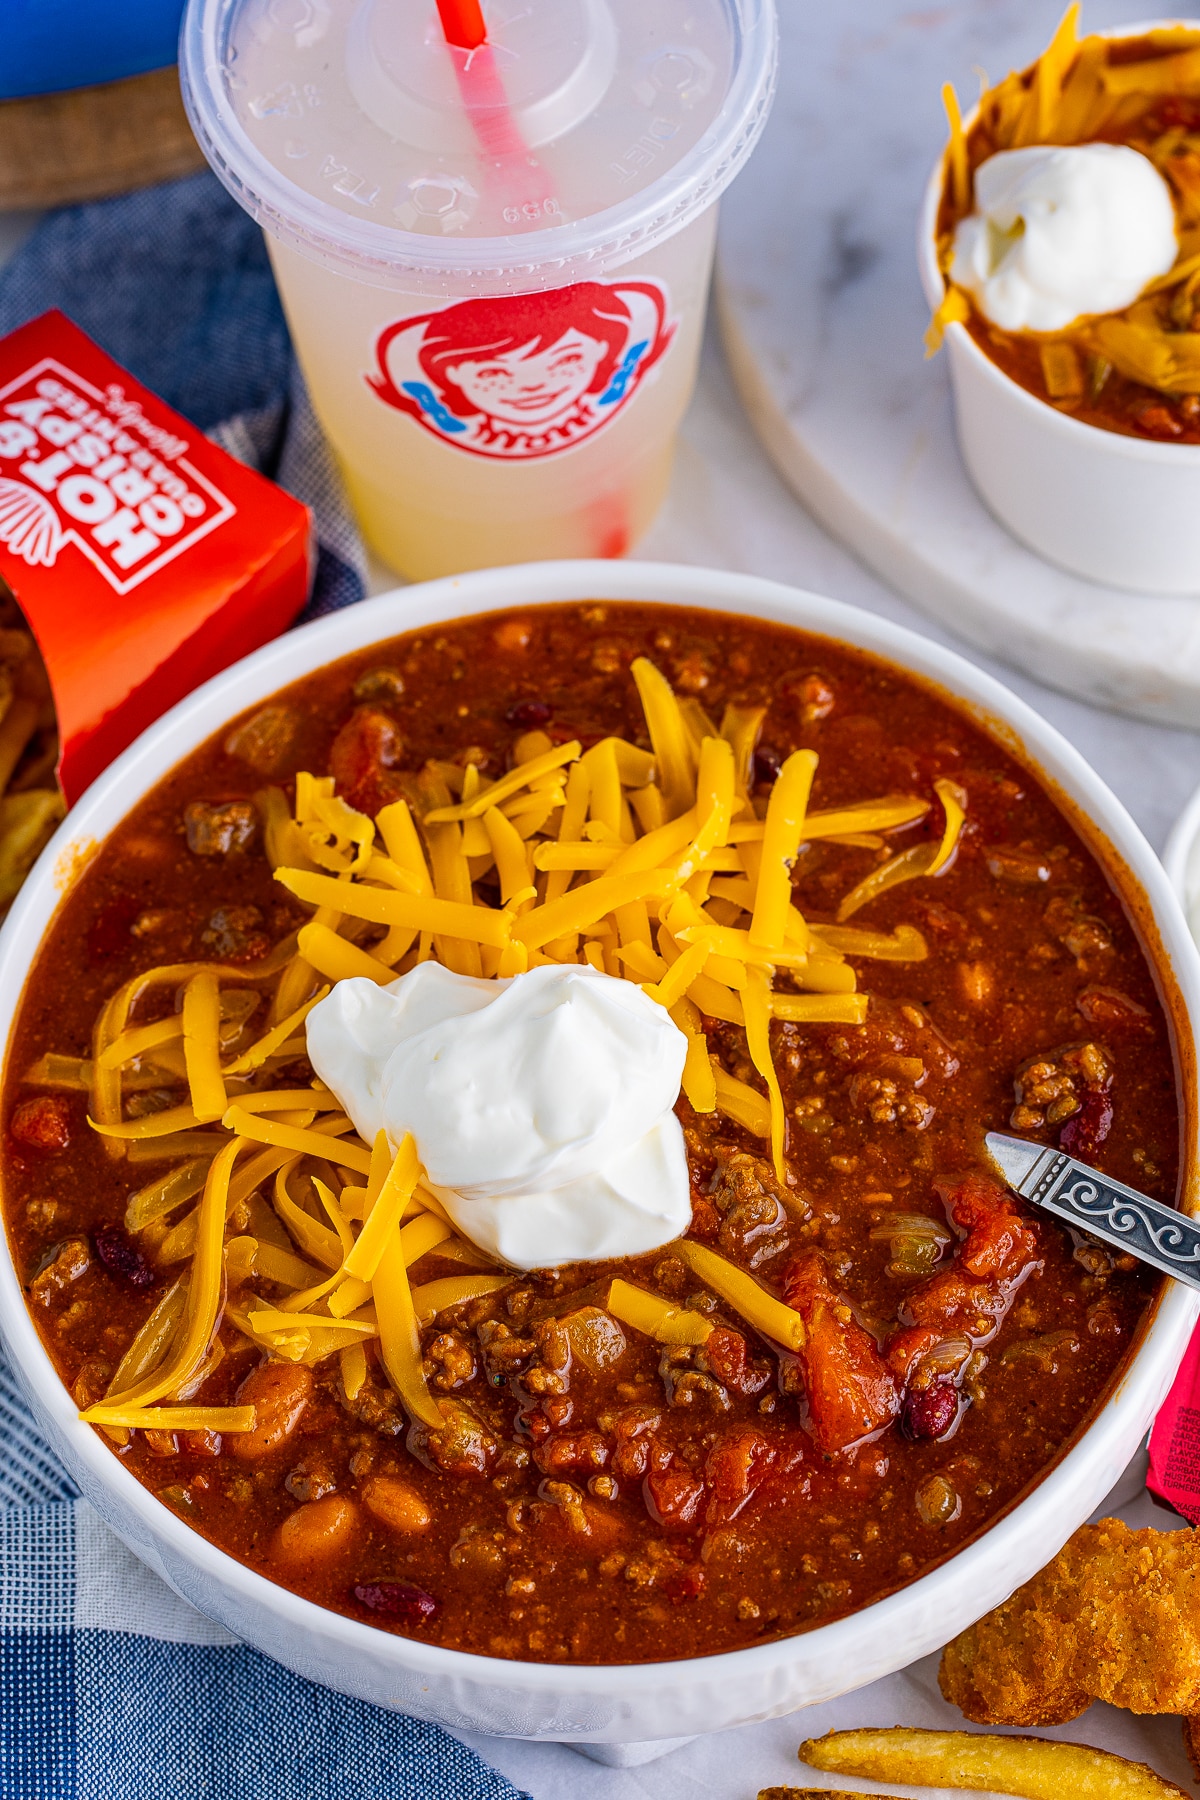 Overhead of bowl of Wendy's Chili with toppings and spoon.